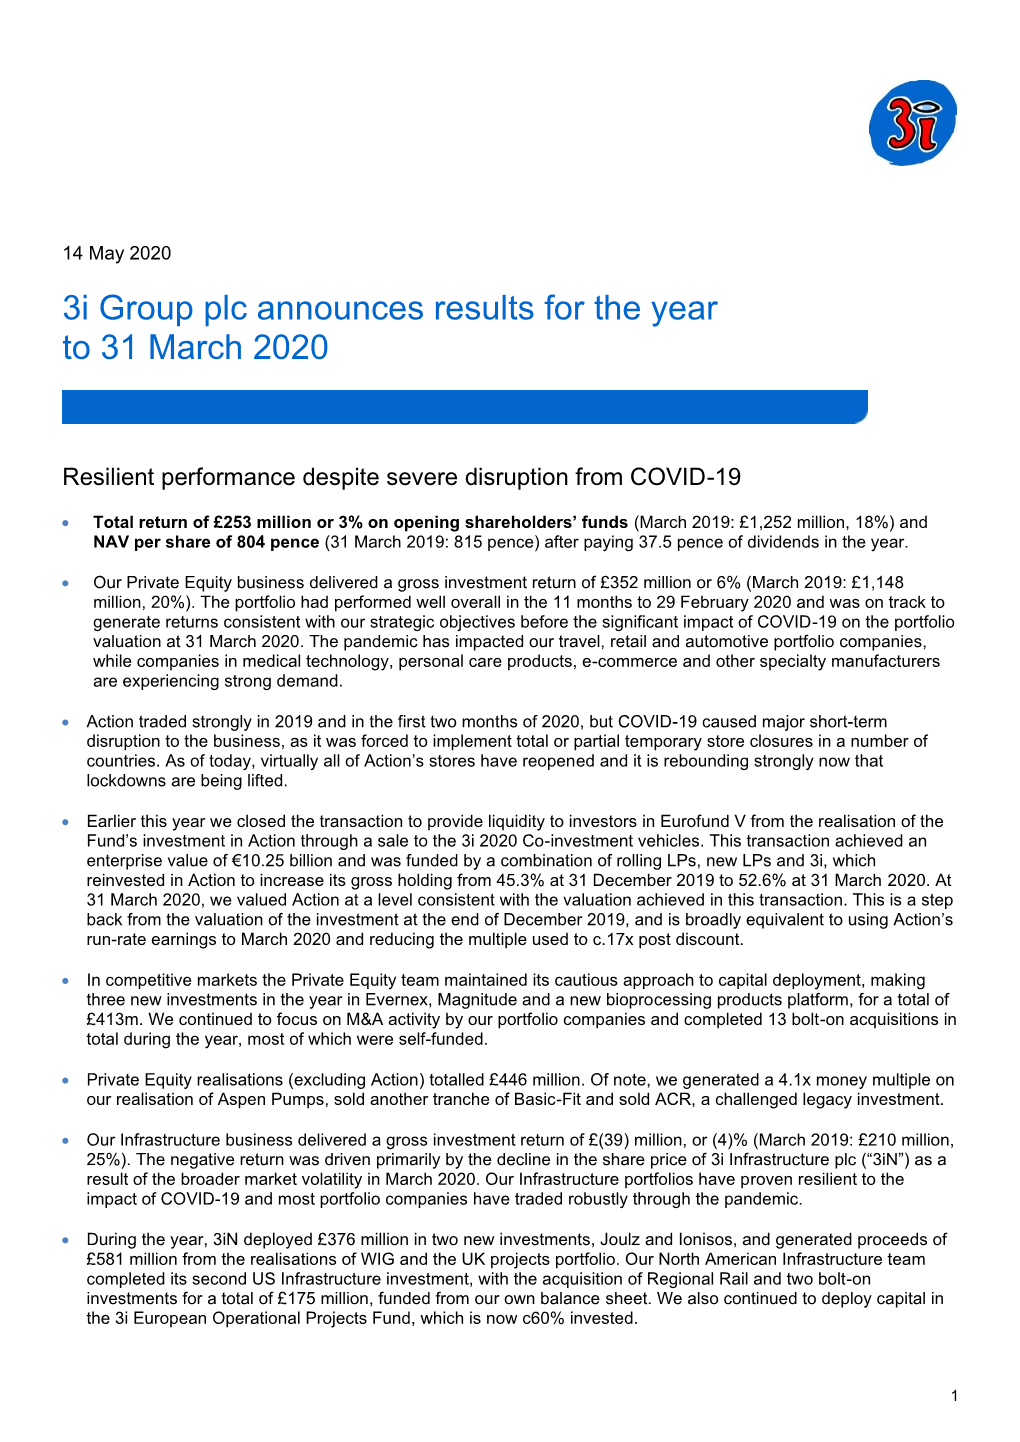 3I Group Plc Announces Results for the Year to 31 March 2020